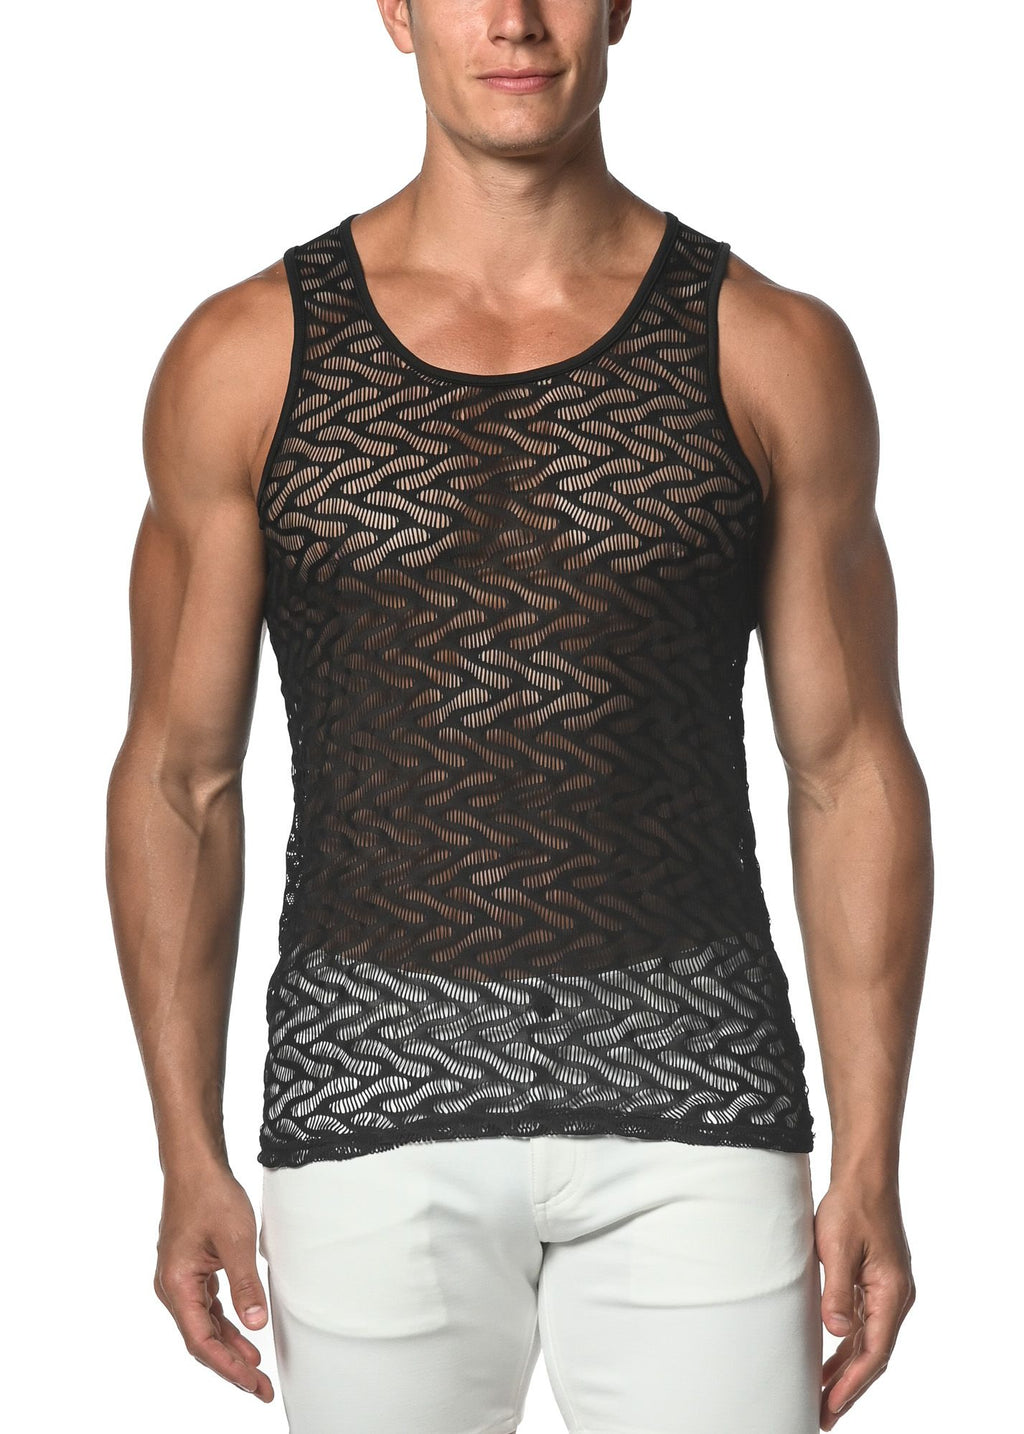 SQUIGGLY GOSSAMER LACE TANK